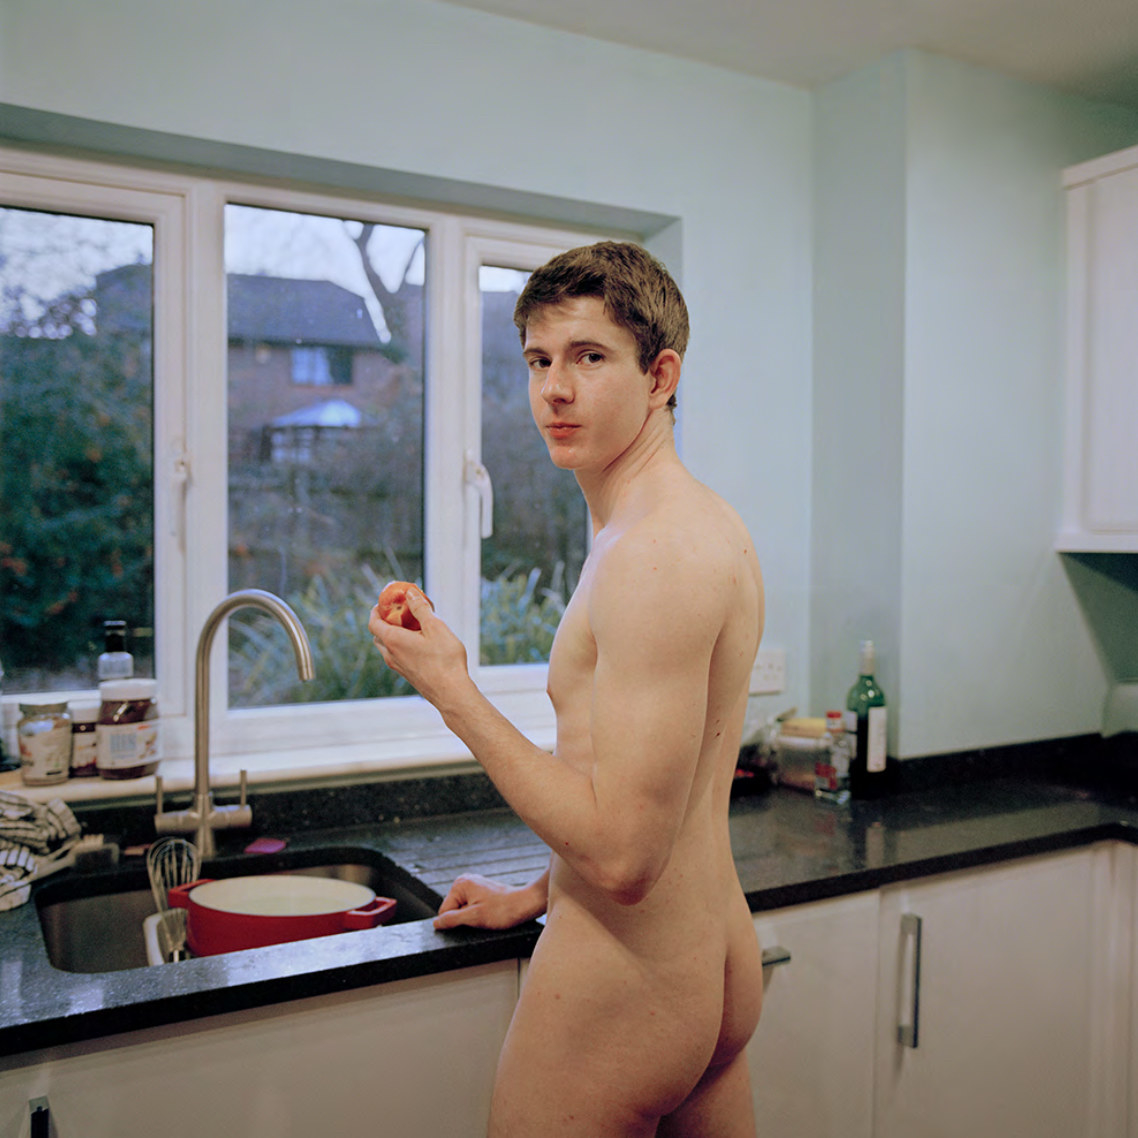 A naked man standing in front of a window at a kitchen sink and holding a fruit looks at the camera